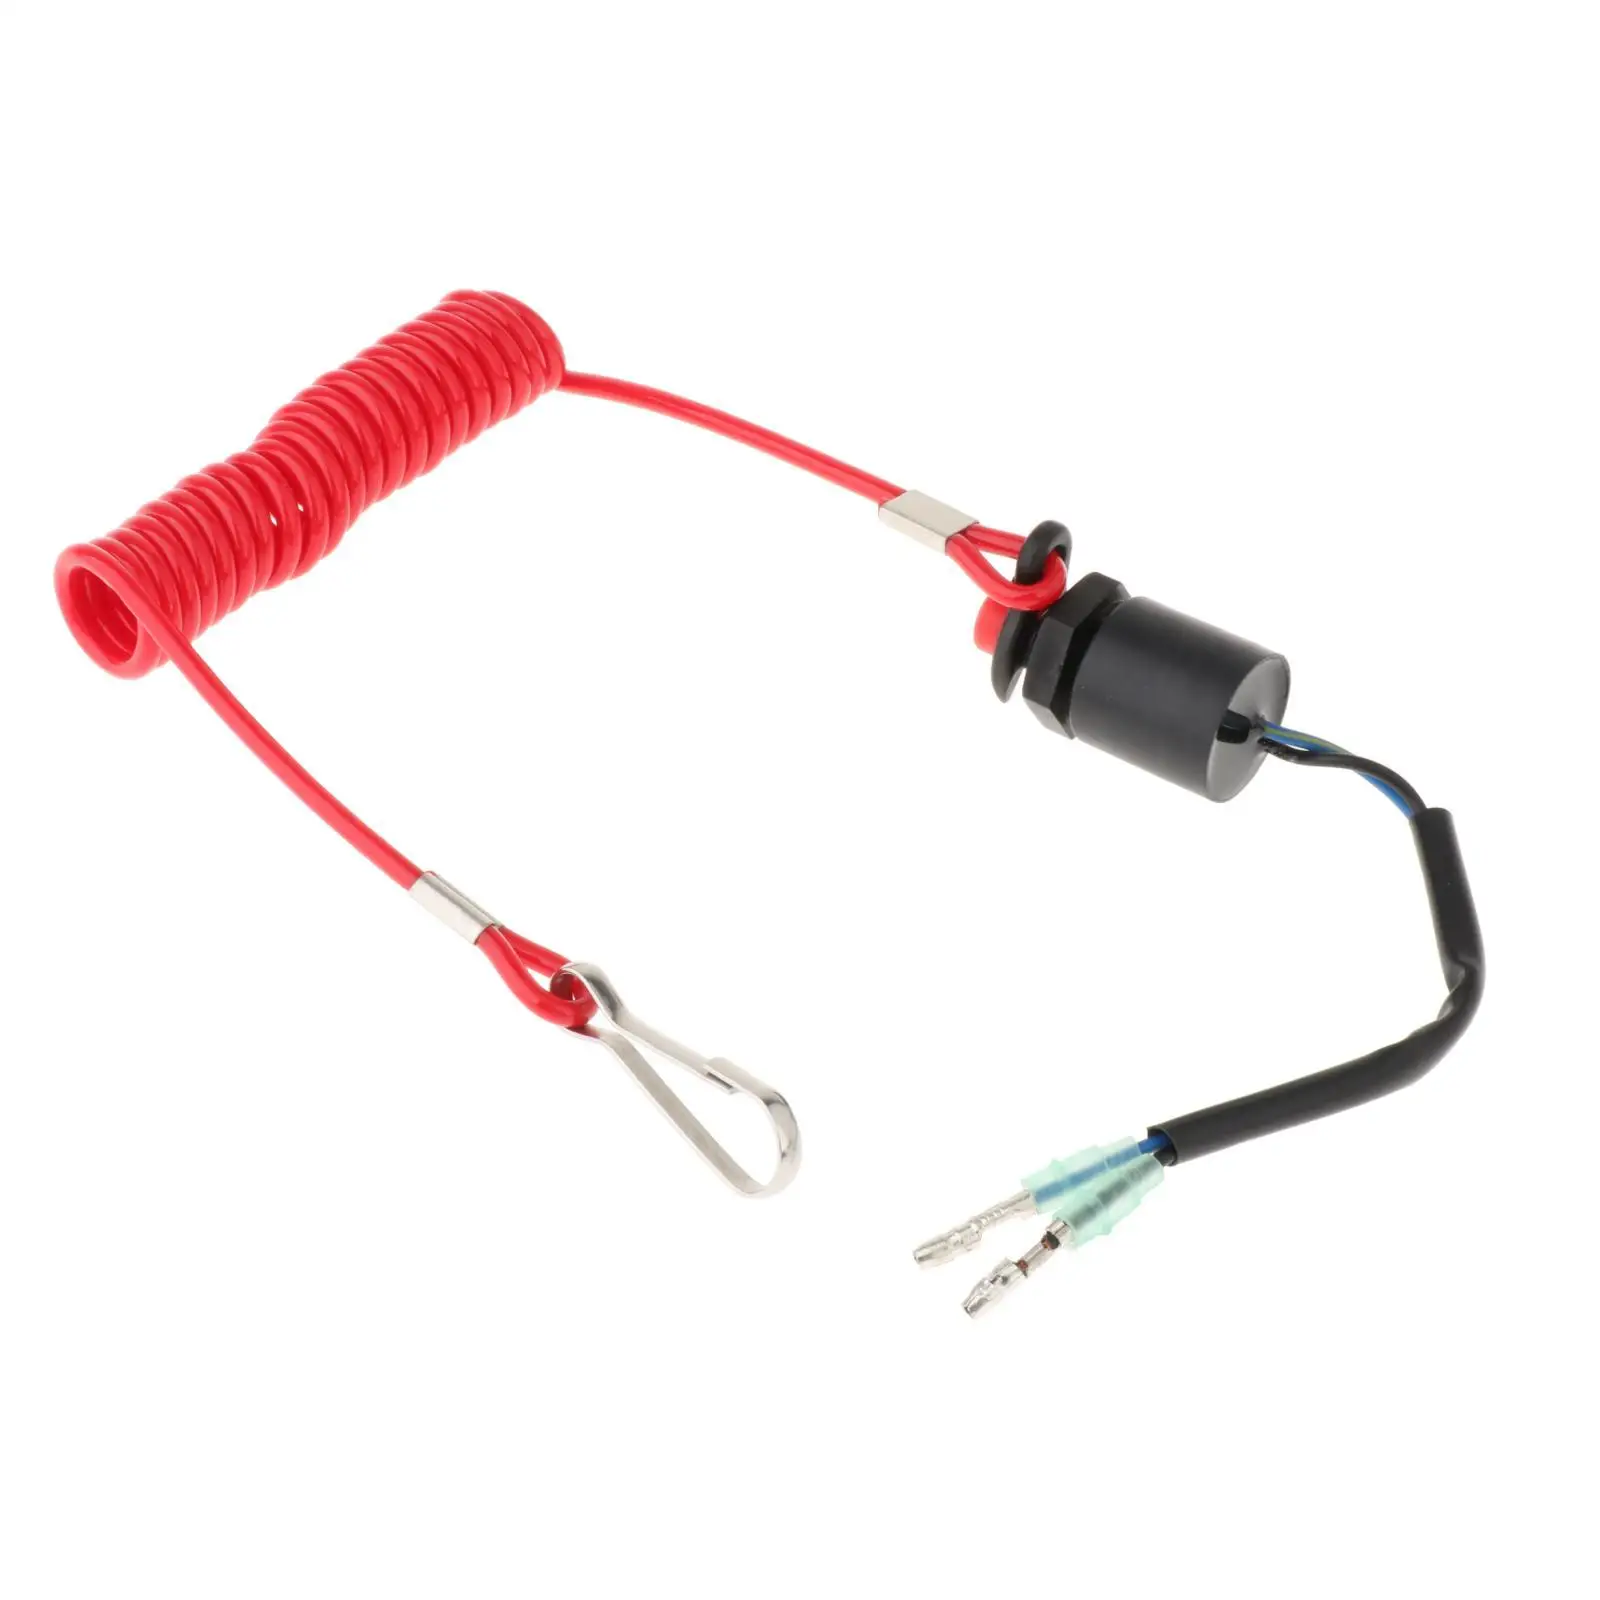 Boat Outboard Switch 37820-92E03 Boat Engine Emergency Stop Switch Boat Kill Switch with Lanyard for Suzuki DT DF 4HP-100HP